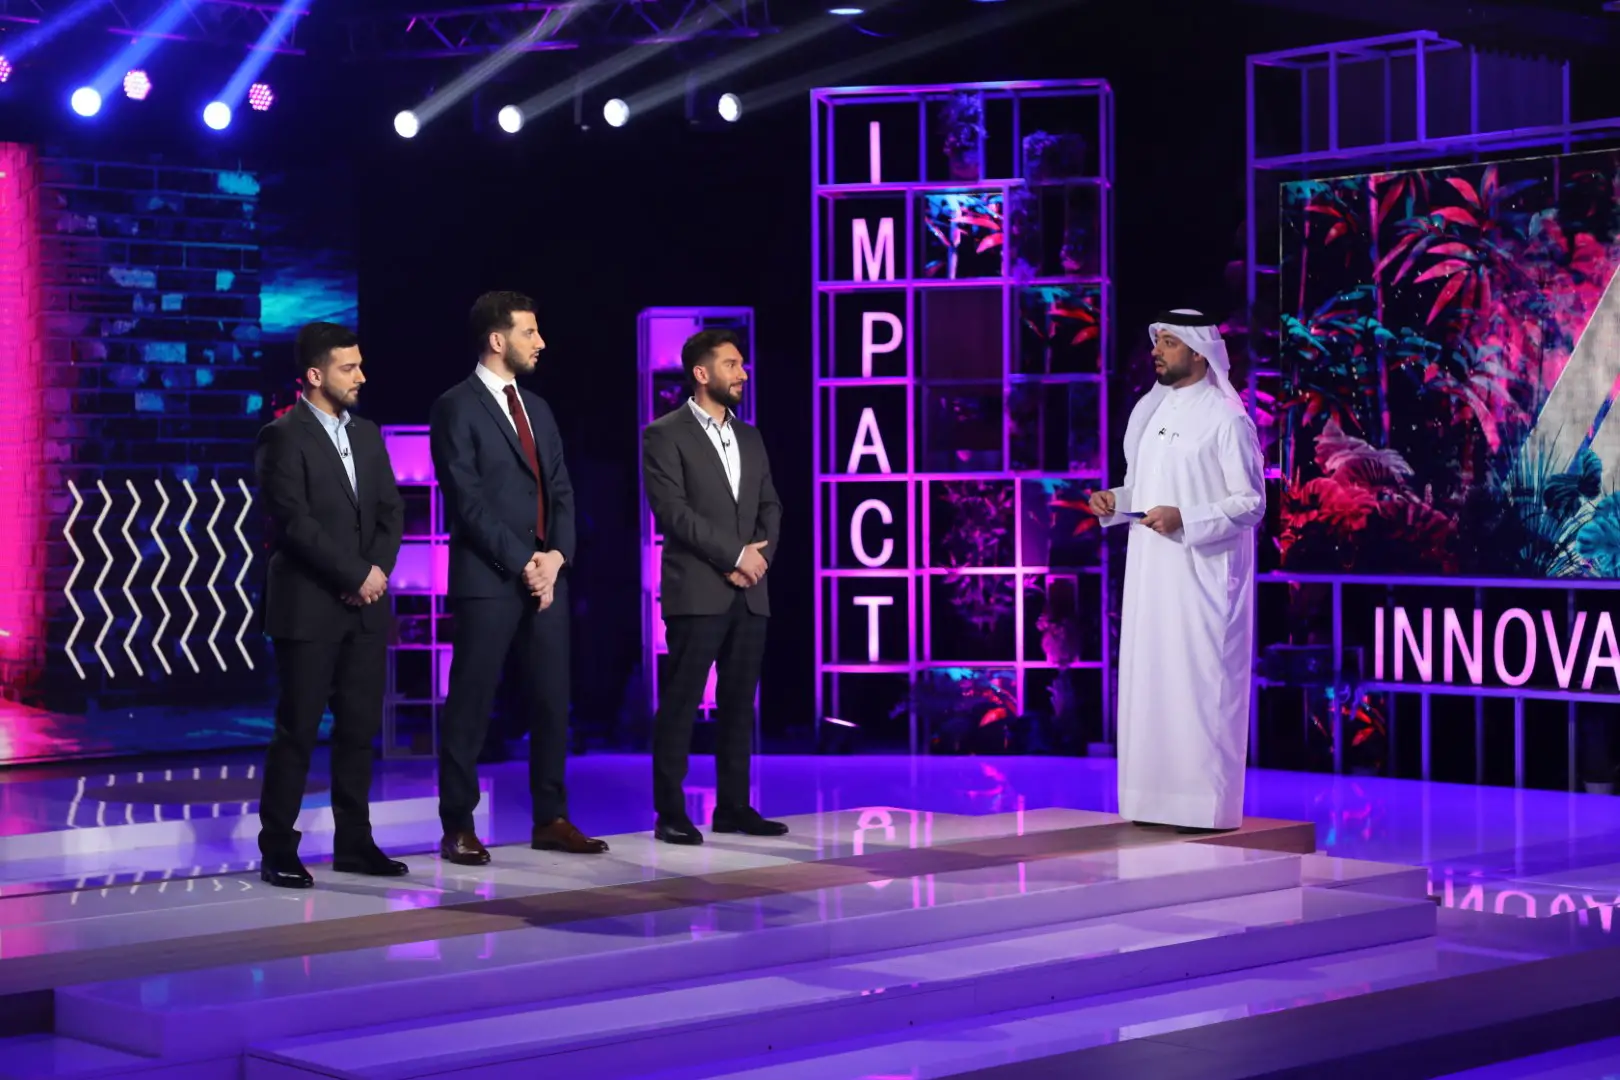 Contestants waiting to hear the jury’s decision (Photo : AETOSWire)